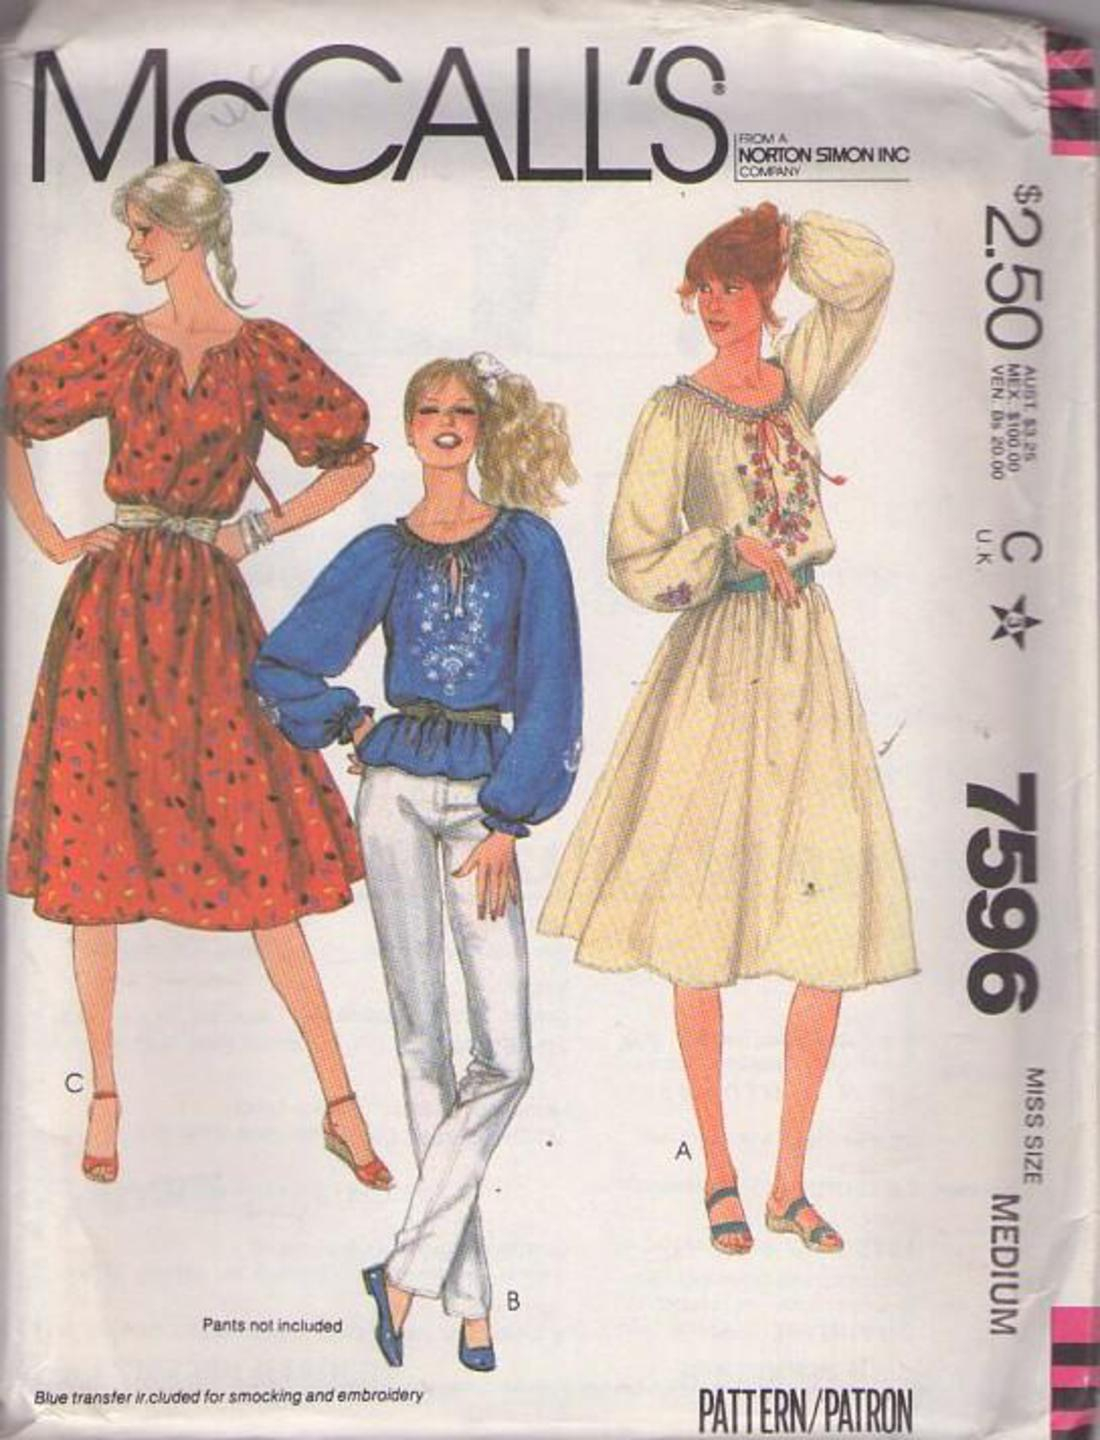 Bohemian Embroidery Patterns Mccalls 7596 Vintage 80s Sewing Pattern Just Lovely Bohemian Ethnic Festival Elastic Scoop Neck Tunic Top Blouse Or Blouson Dress Floral